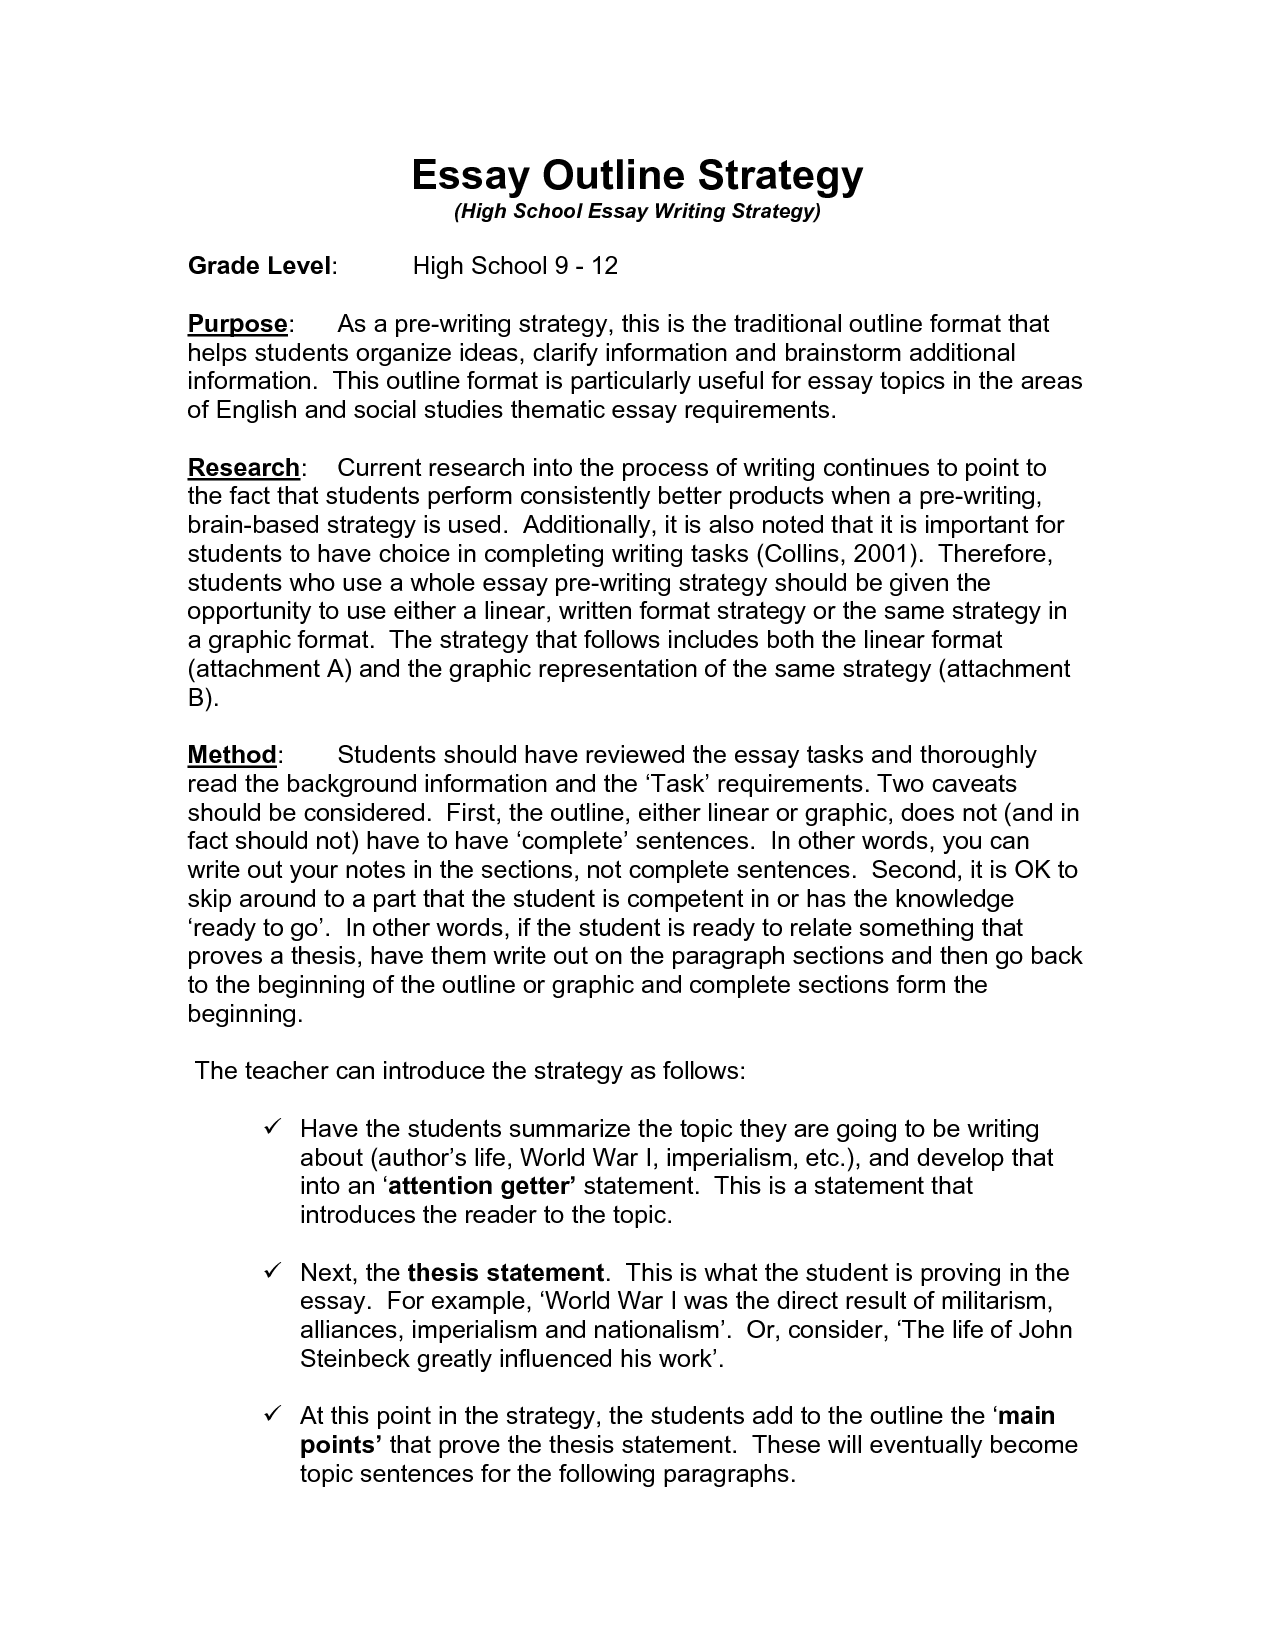 Example of Essay Writing in English